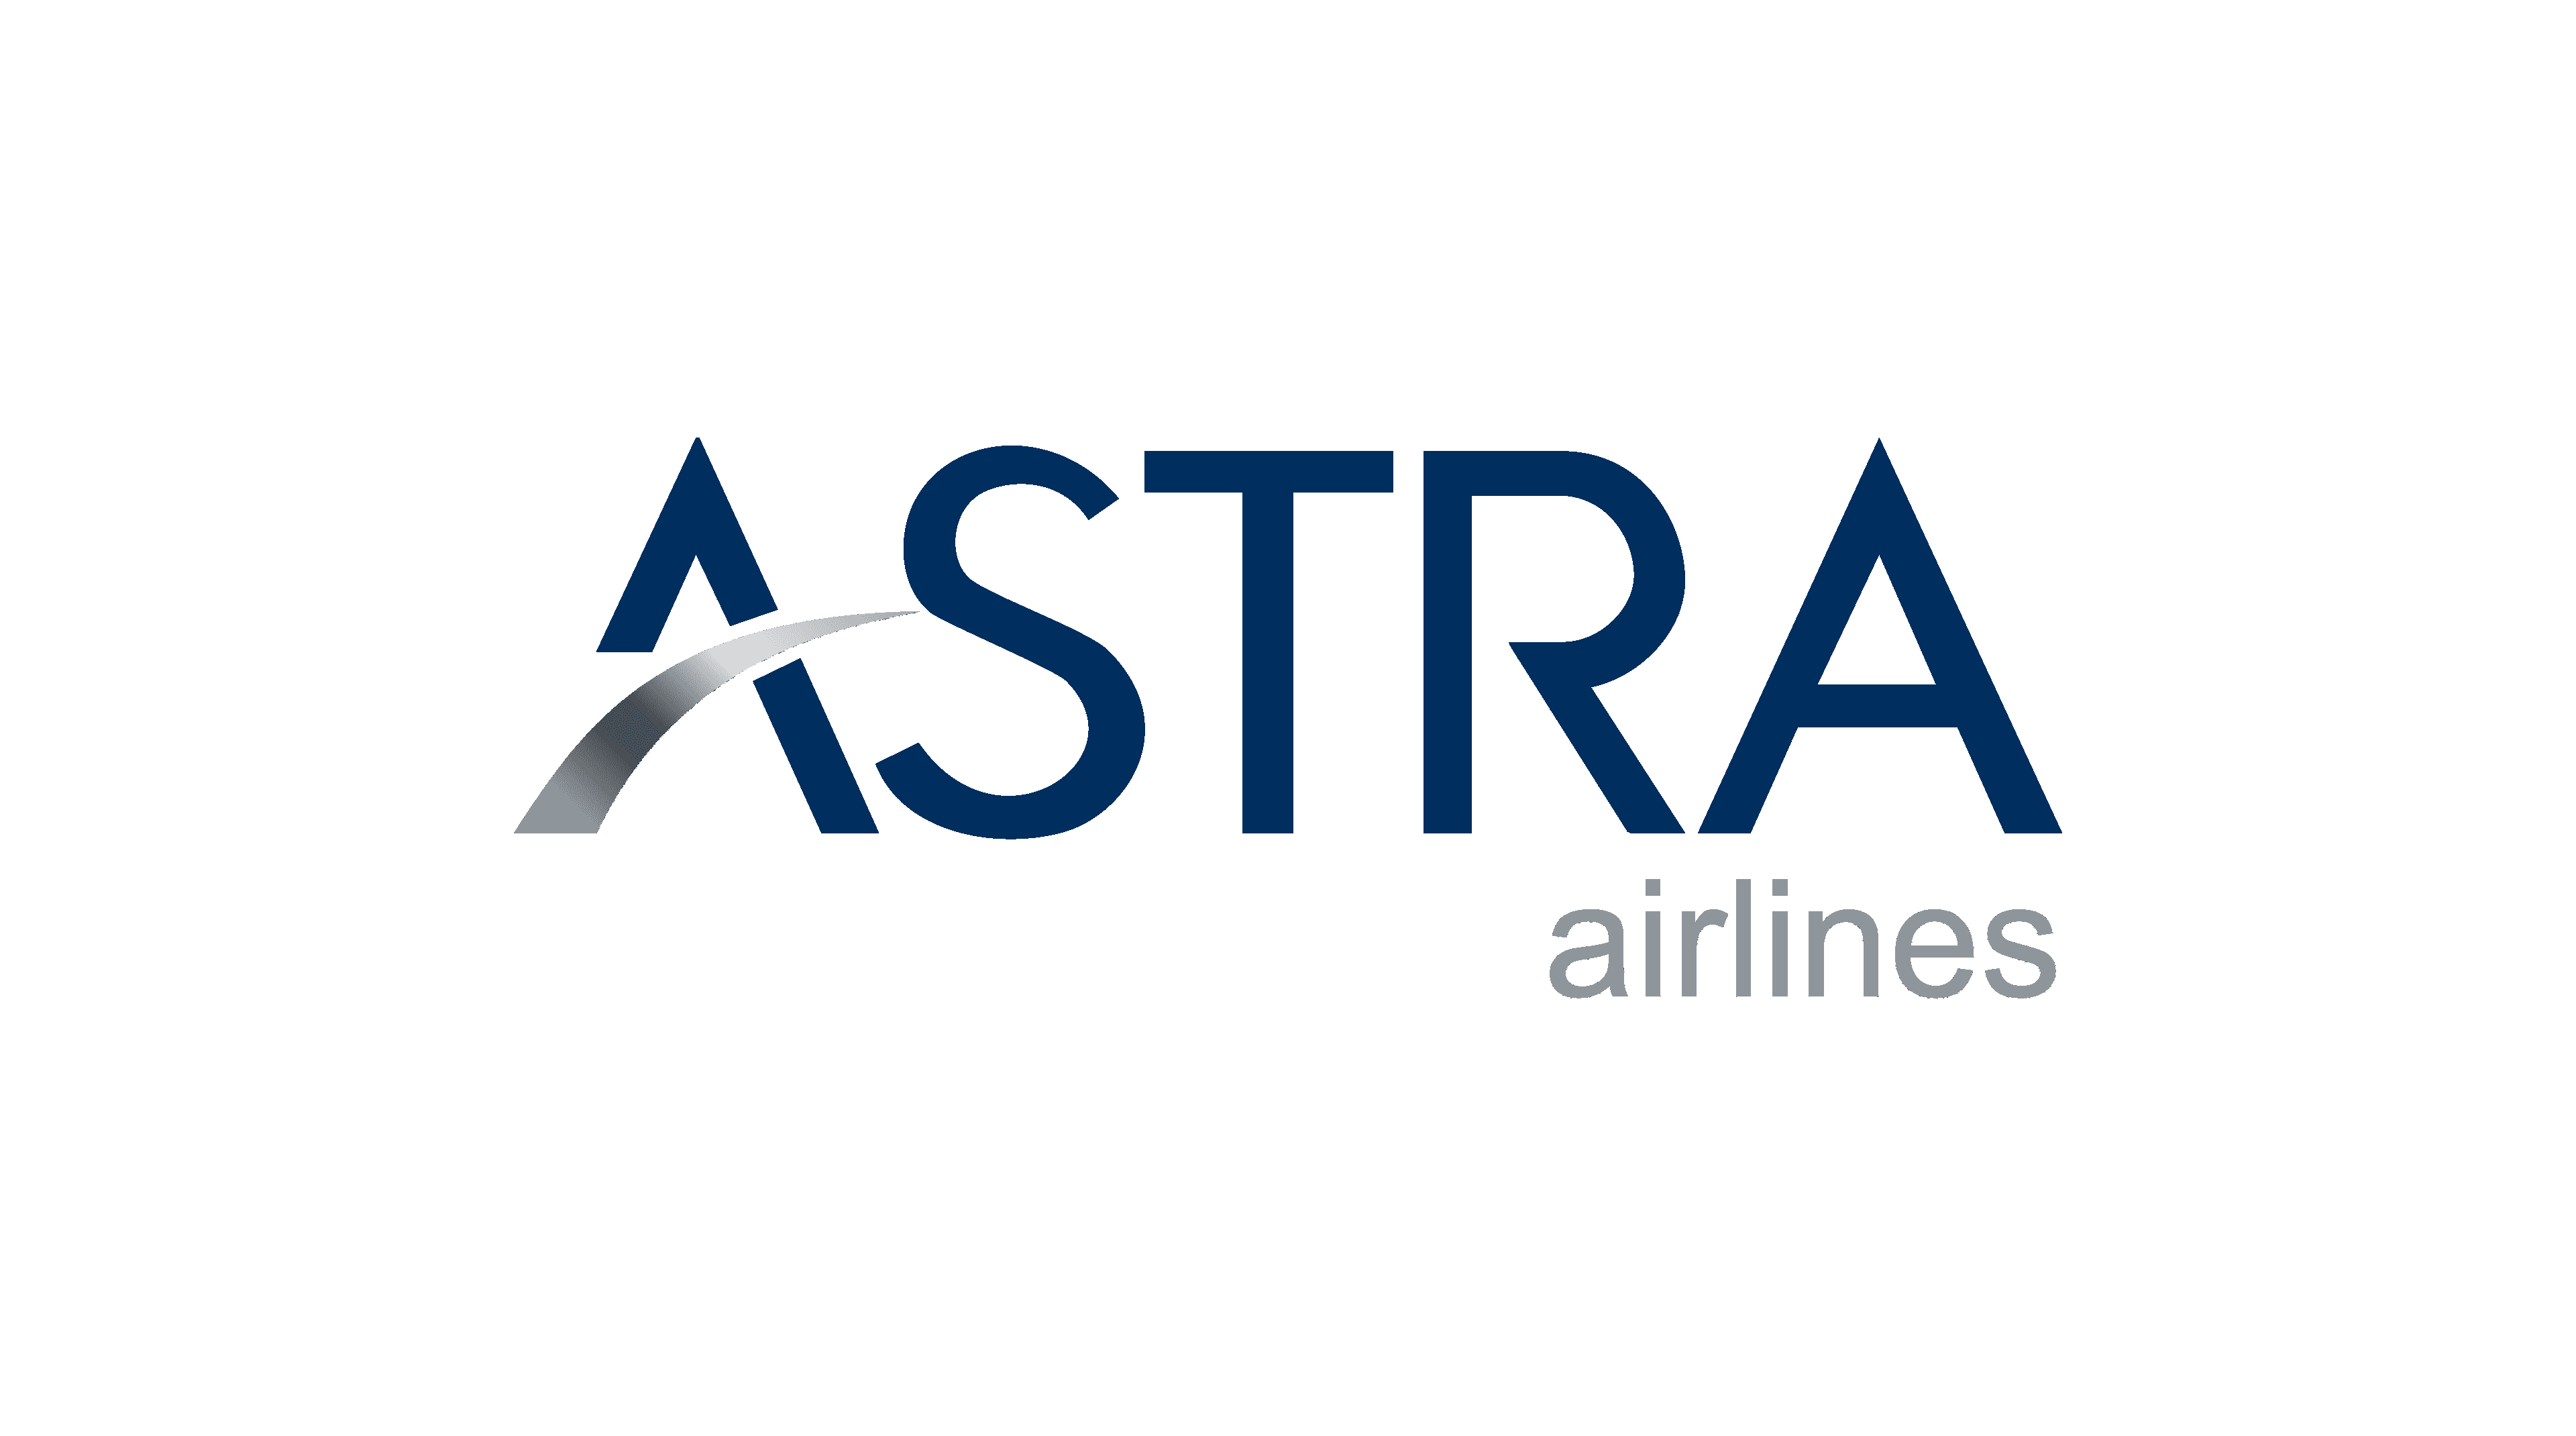 Astra Airlines